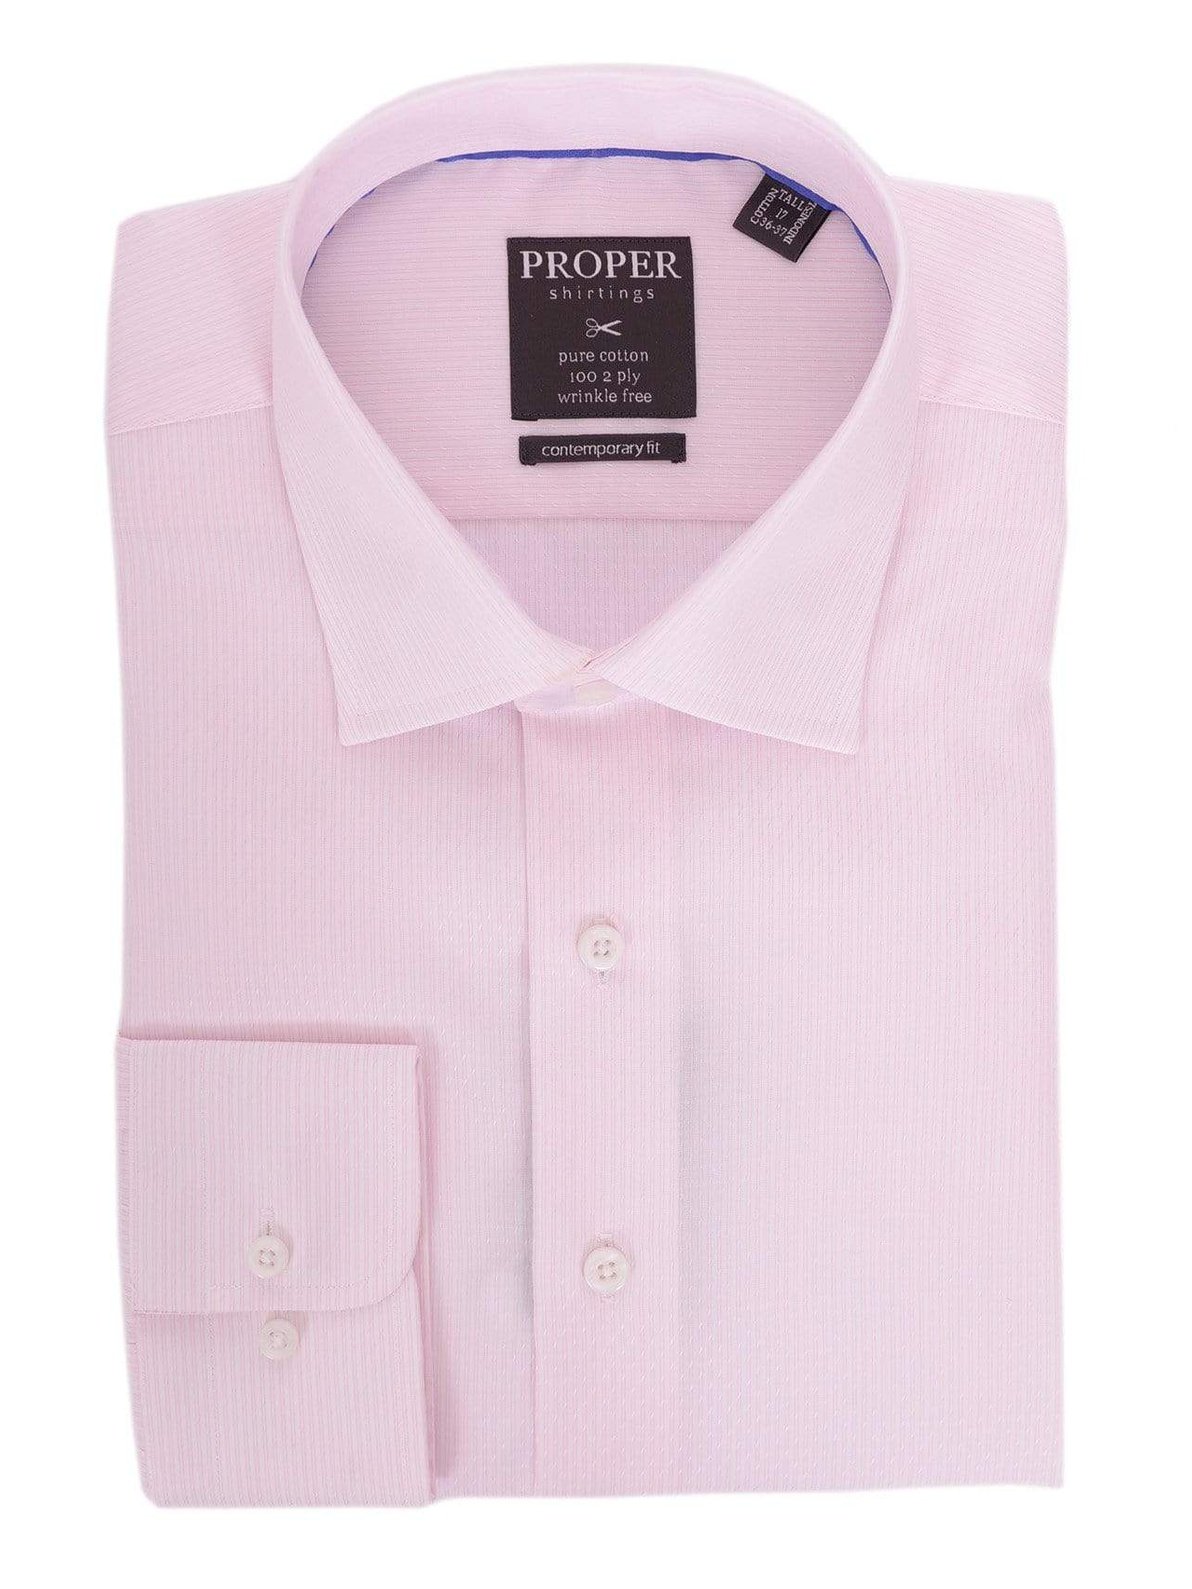 Proper Shirtings SHIRTS 15 1/2 34/35 Slim Fit Pink Striped Spread Collar Wrinkle Free 100 2 Ply Cotton Dress Shirt